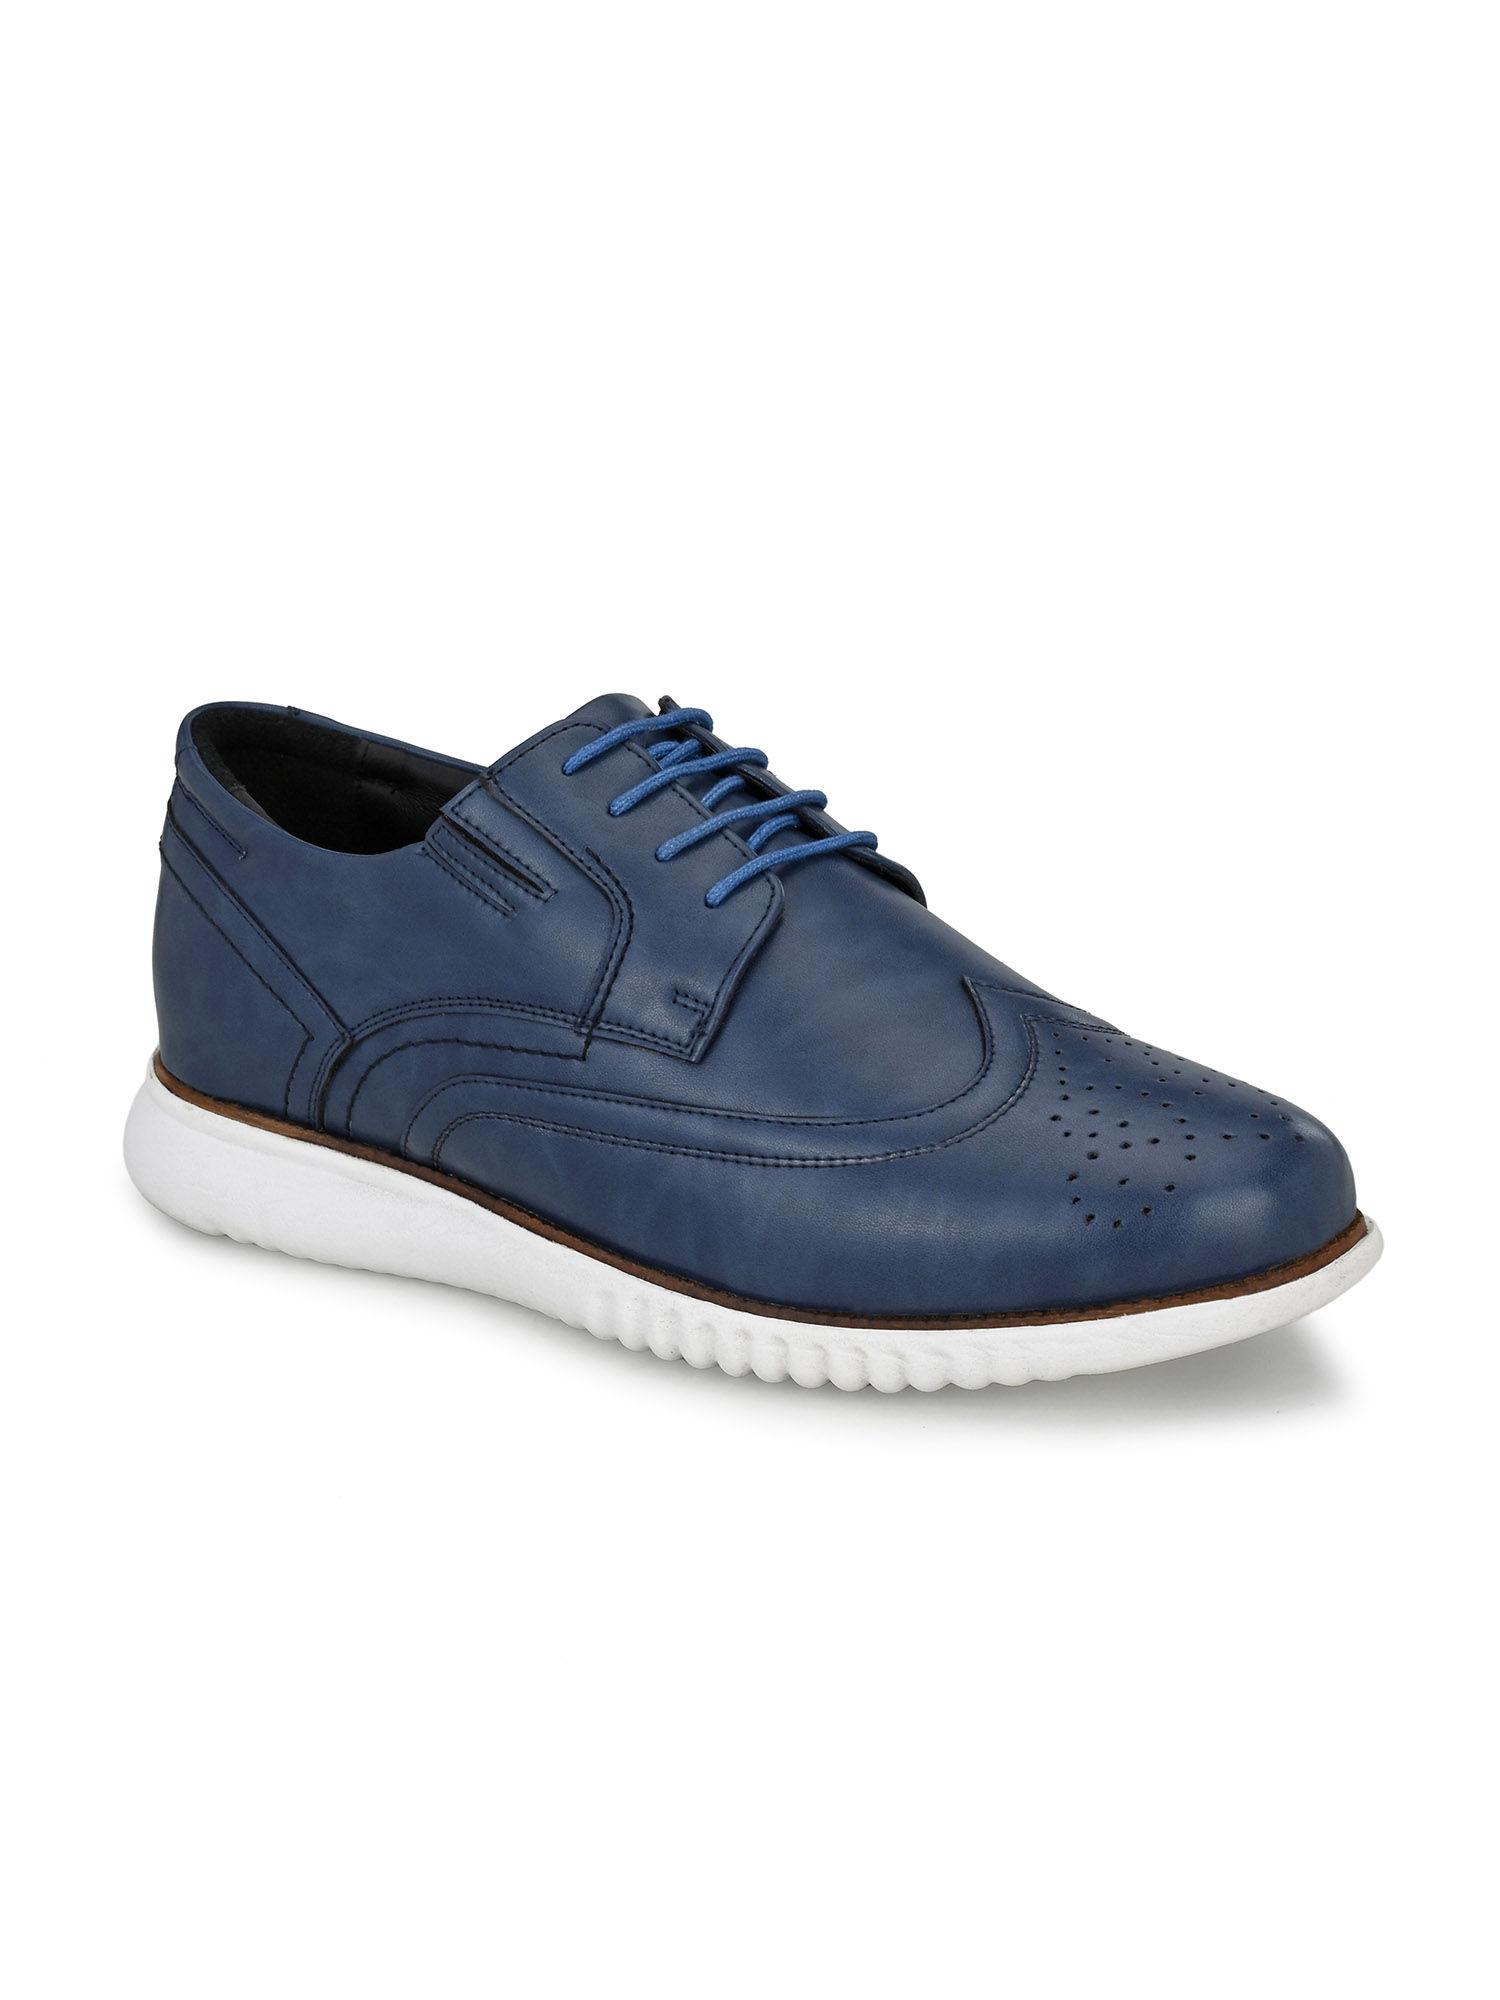 men's-blue-synthetic-lace-up-casual-shoes